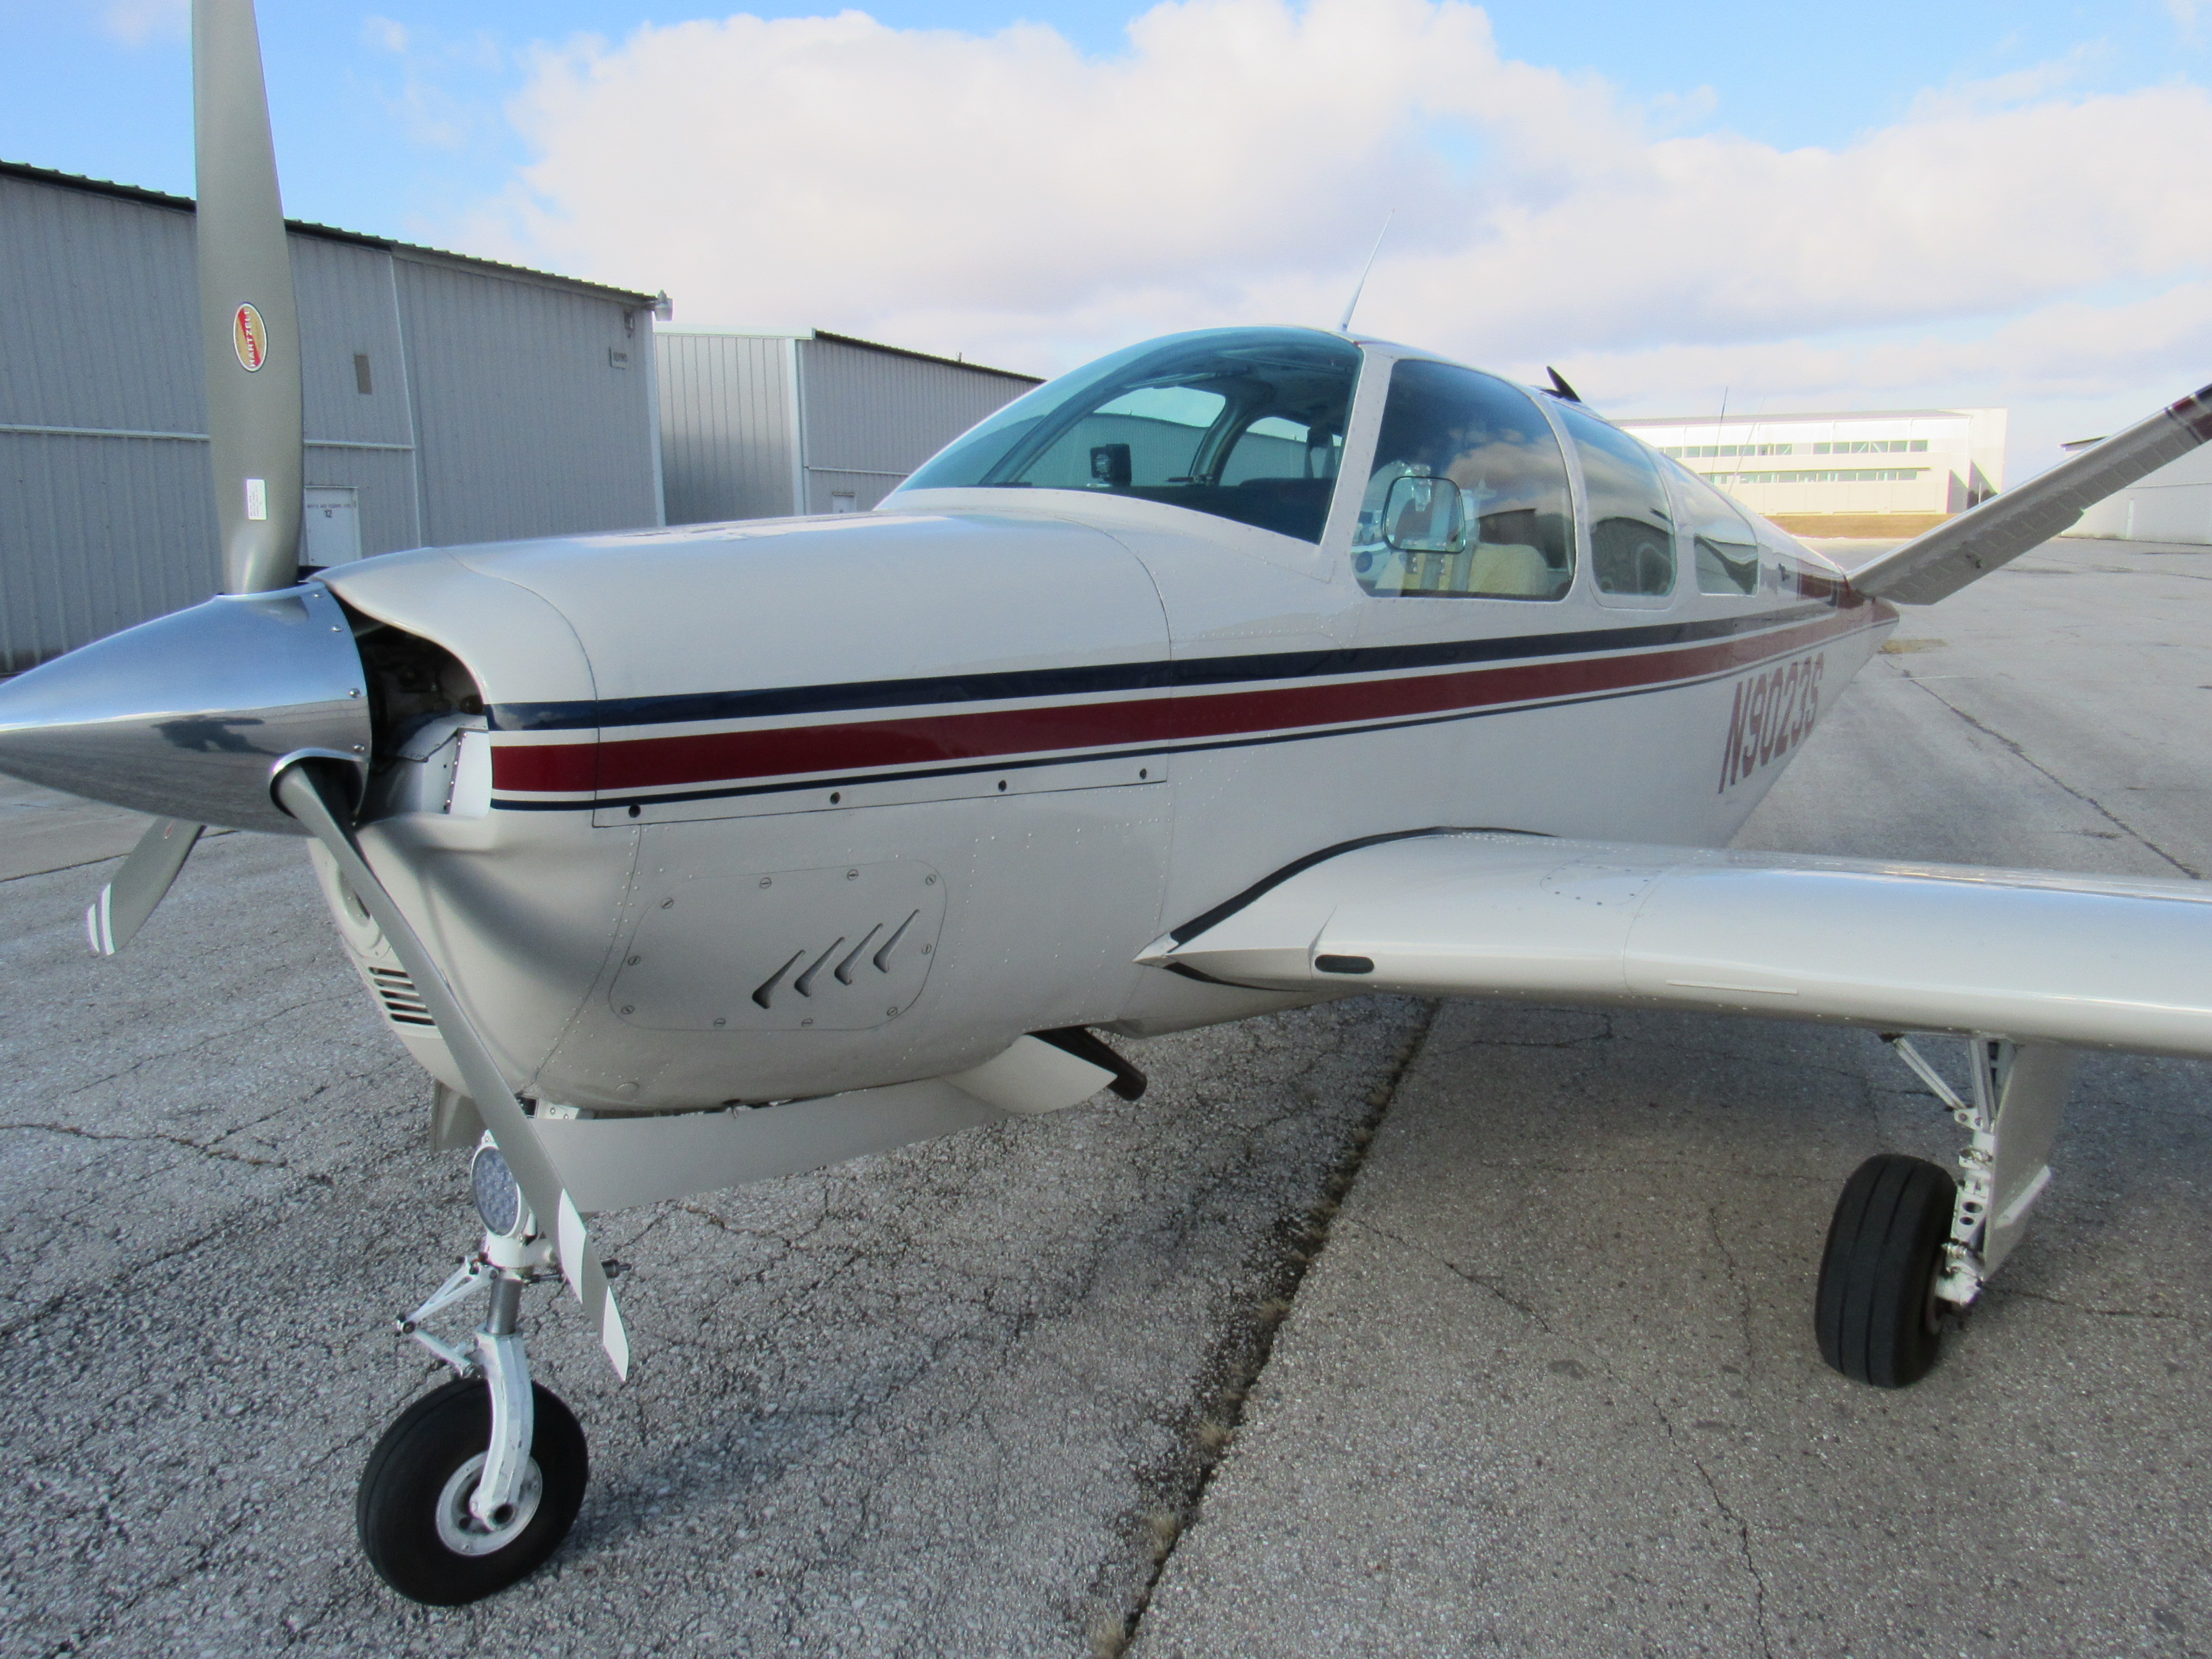 An exquisite example of Beechcraft’s "fast one," this S35 is sure...